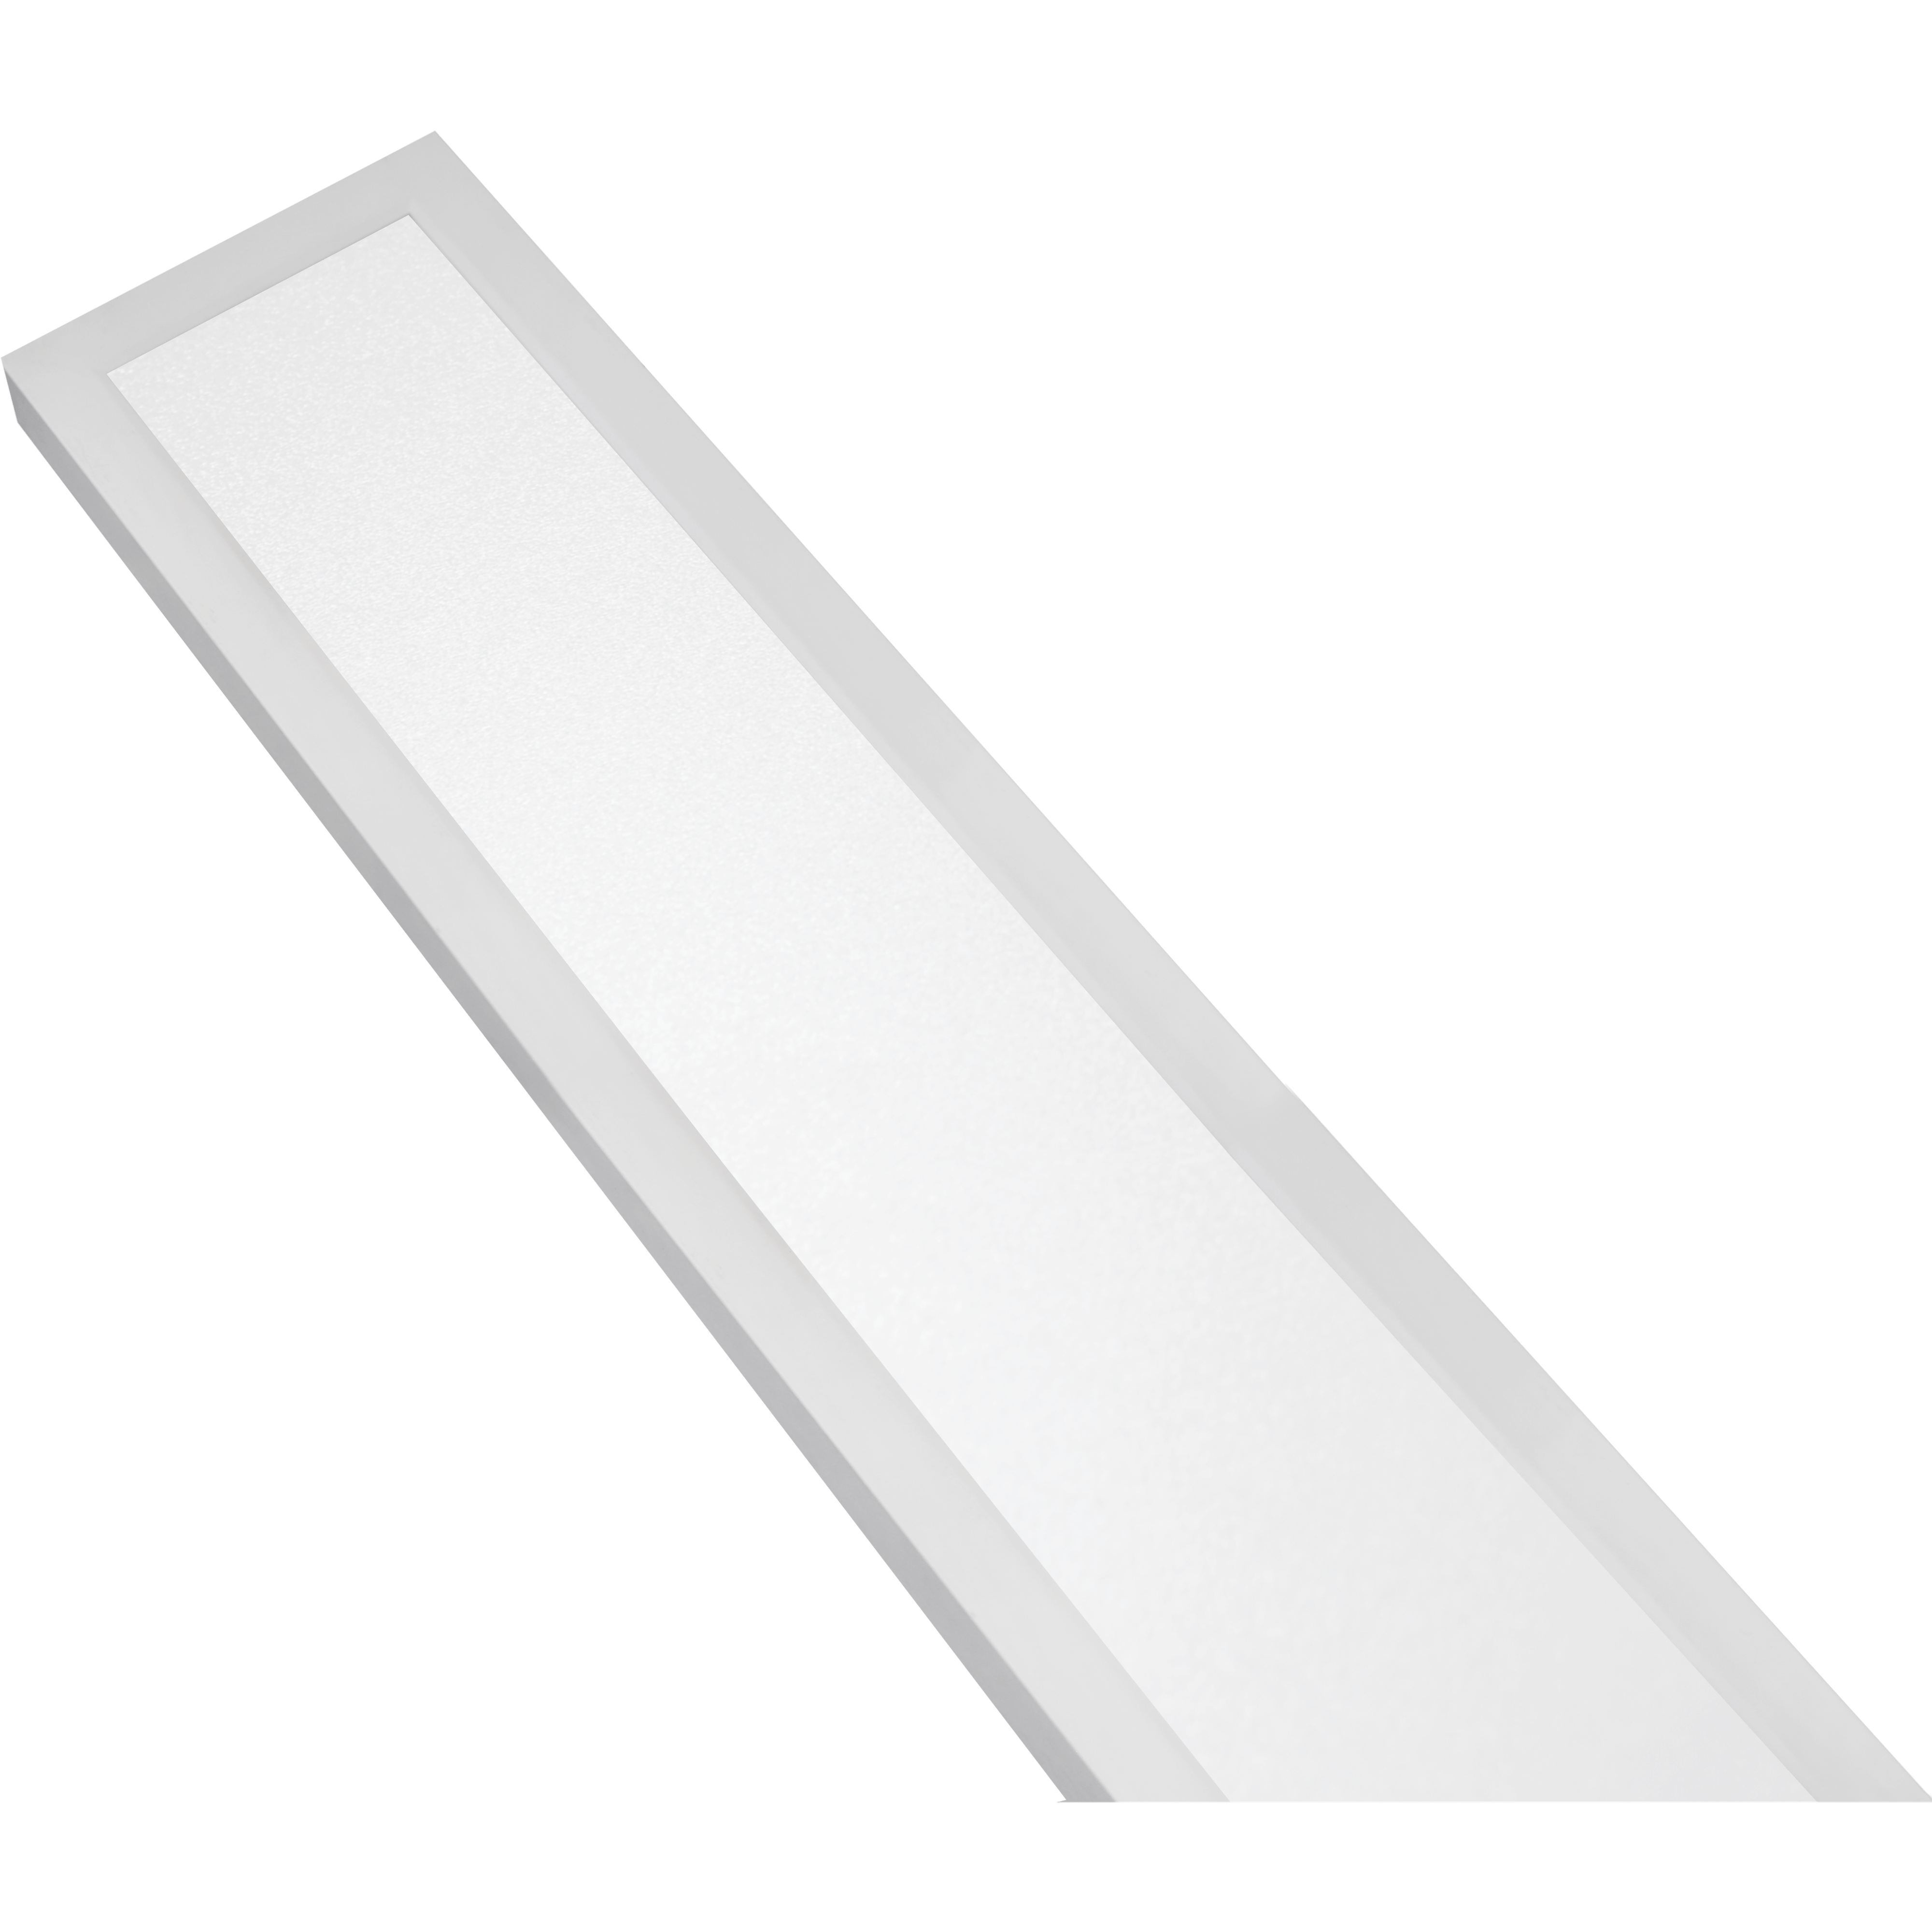 POE Texas Lighting Denton Linear Recessed PoE Lights - 4 in x 2 ft (Surface)